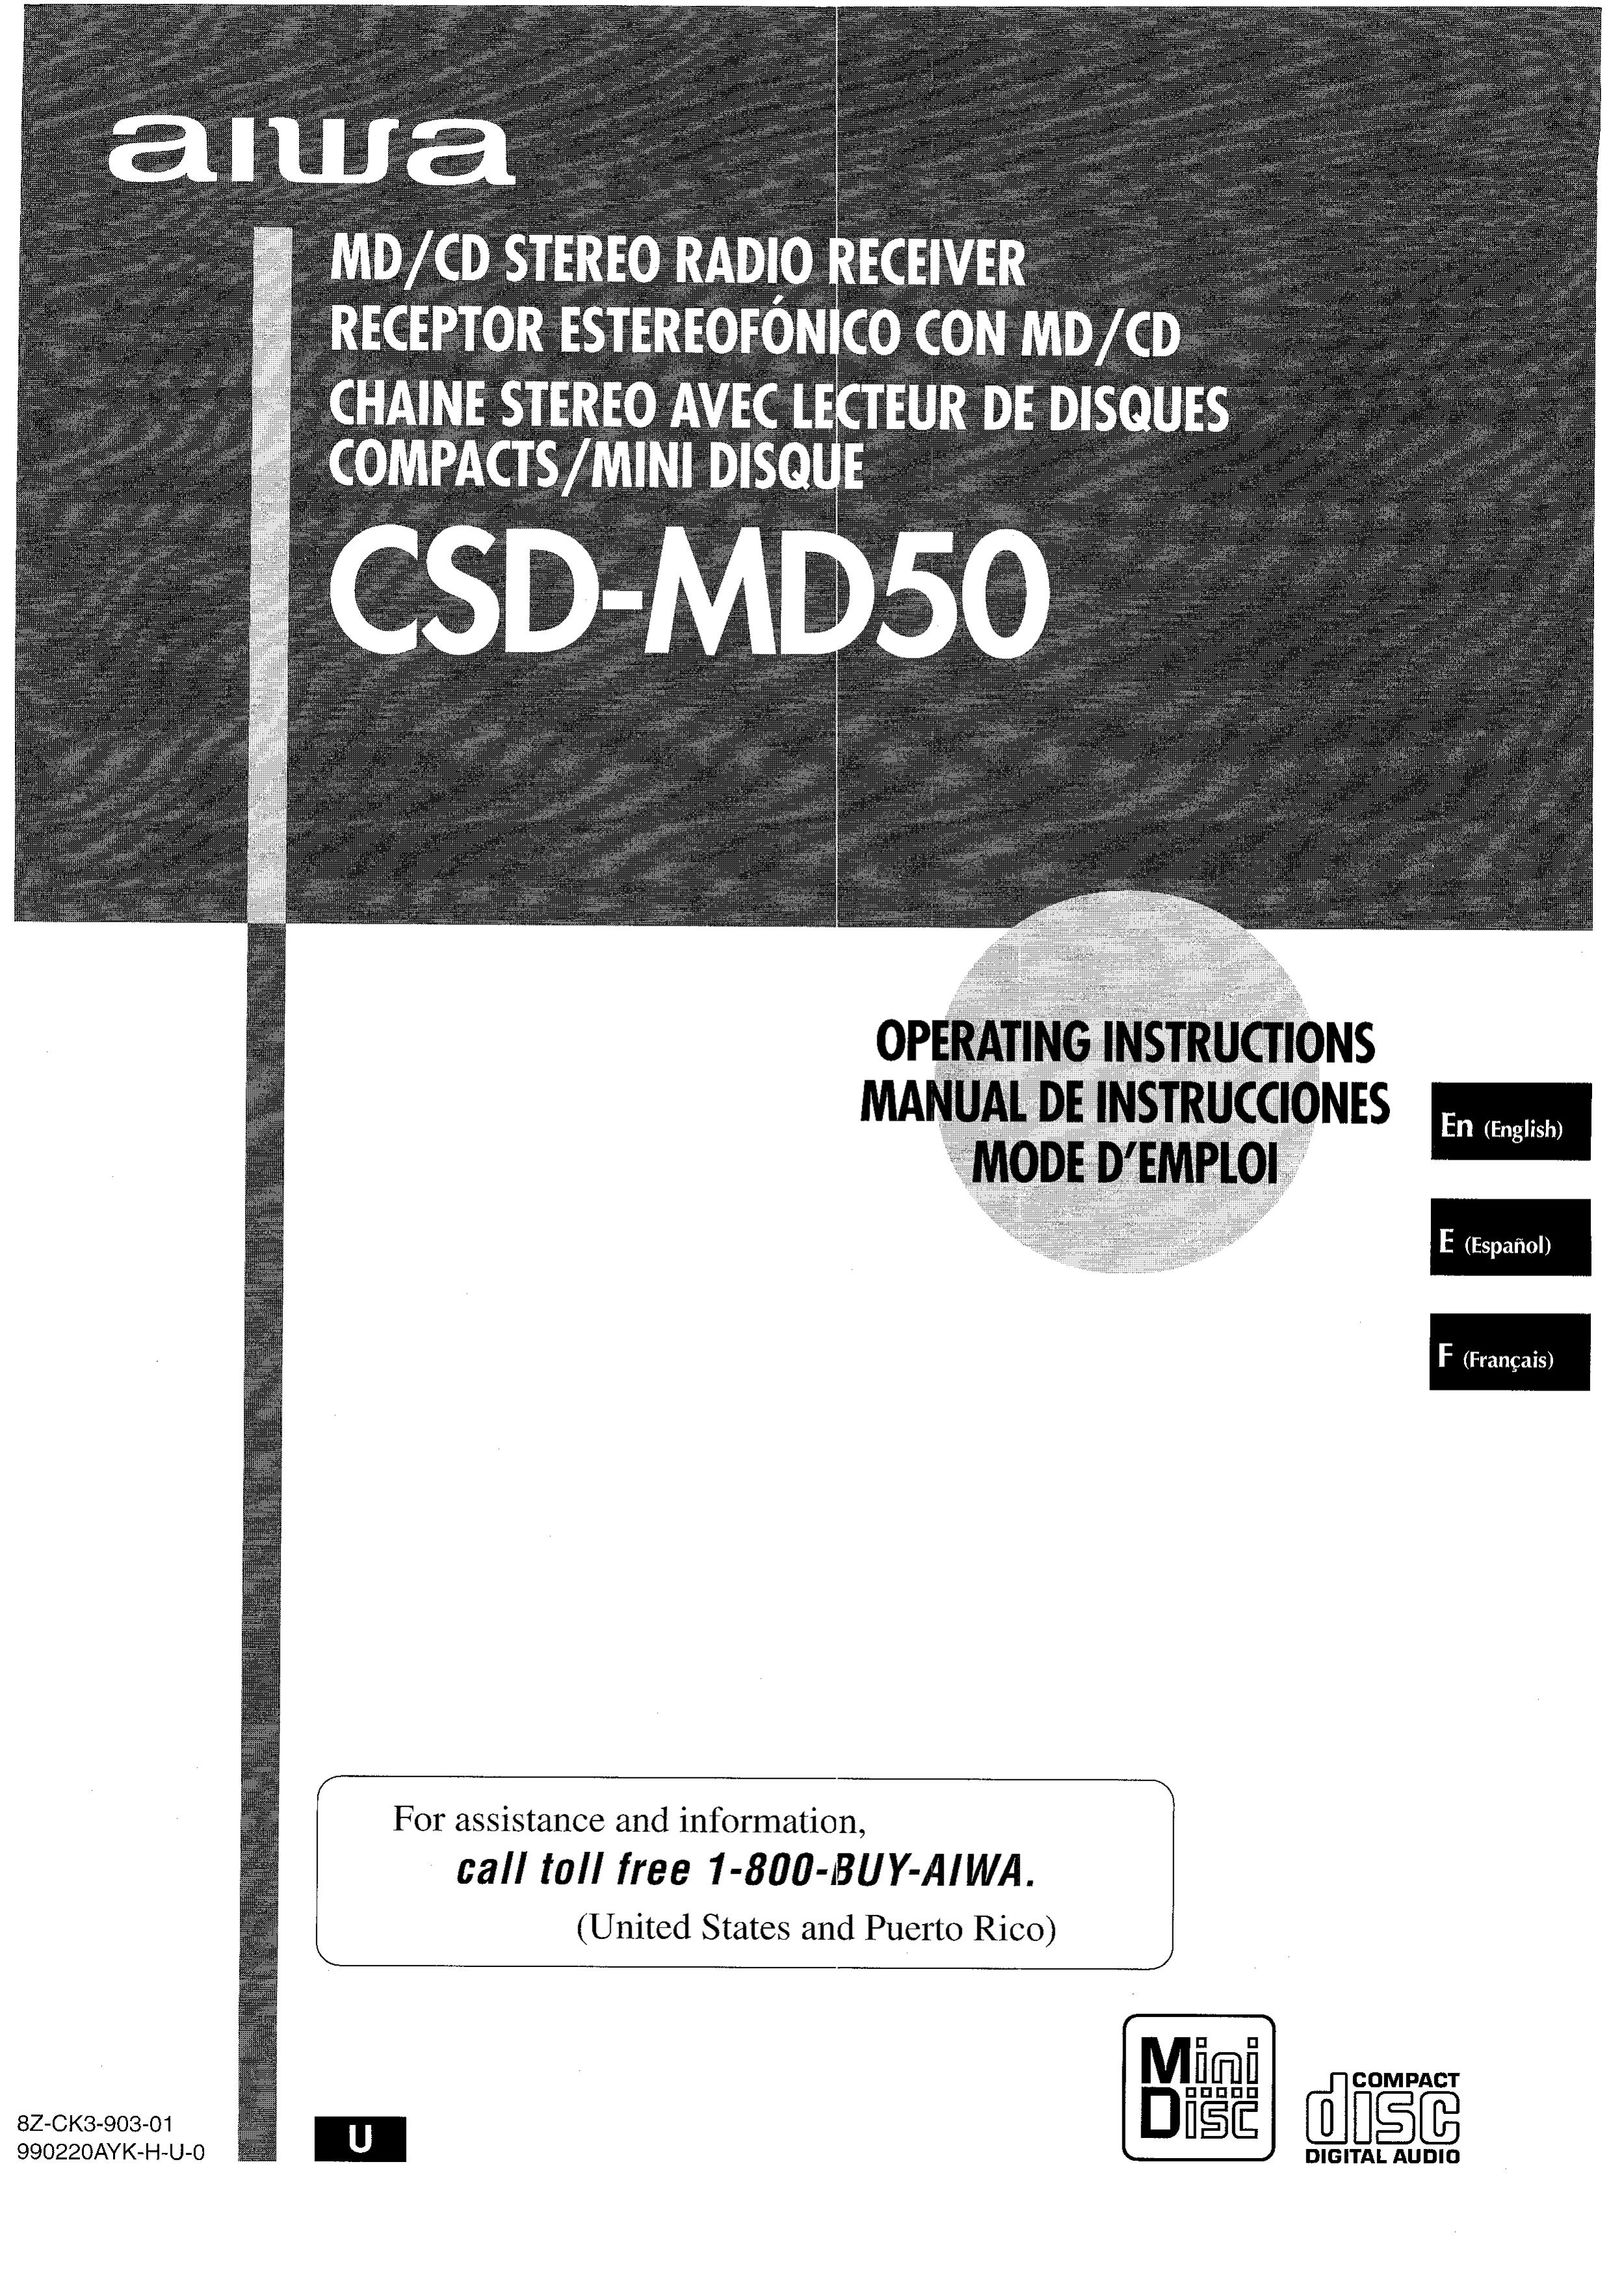 Aiwa CSD-MD50 Stereo System User Manual